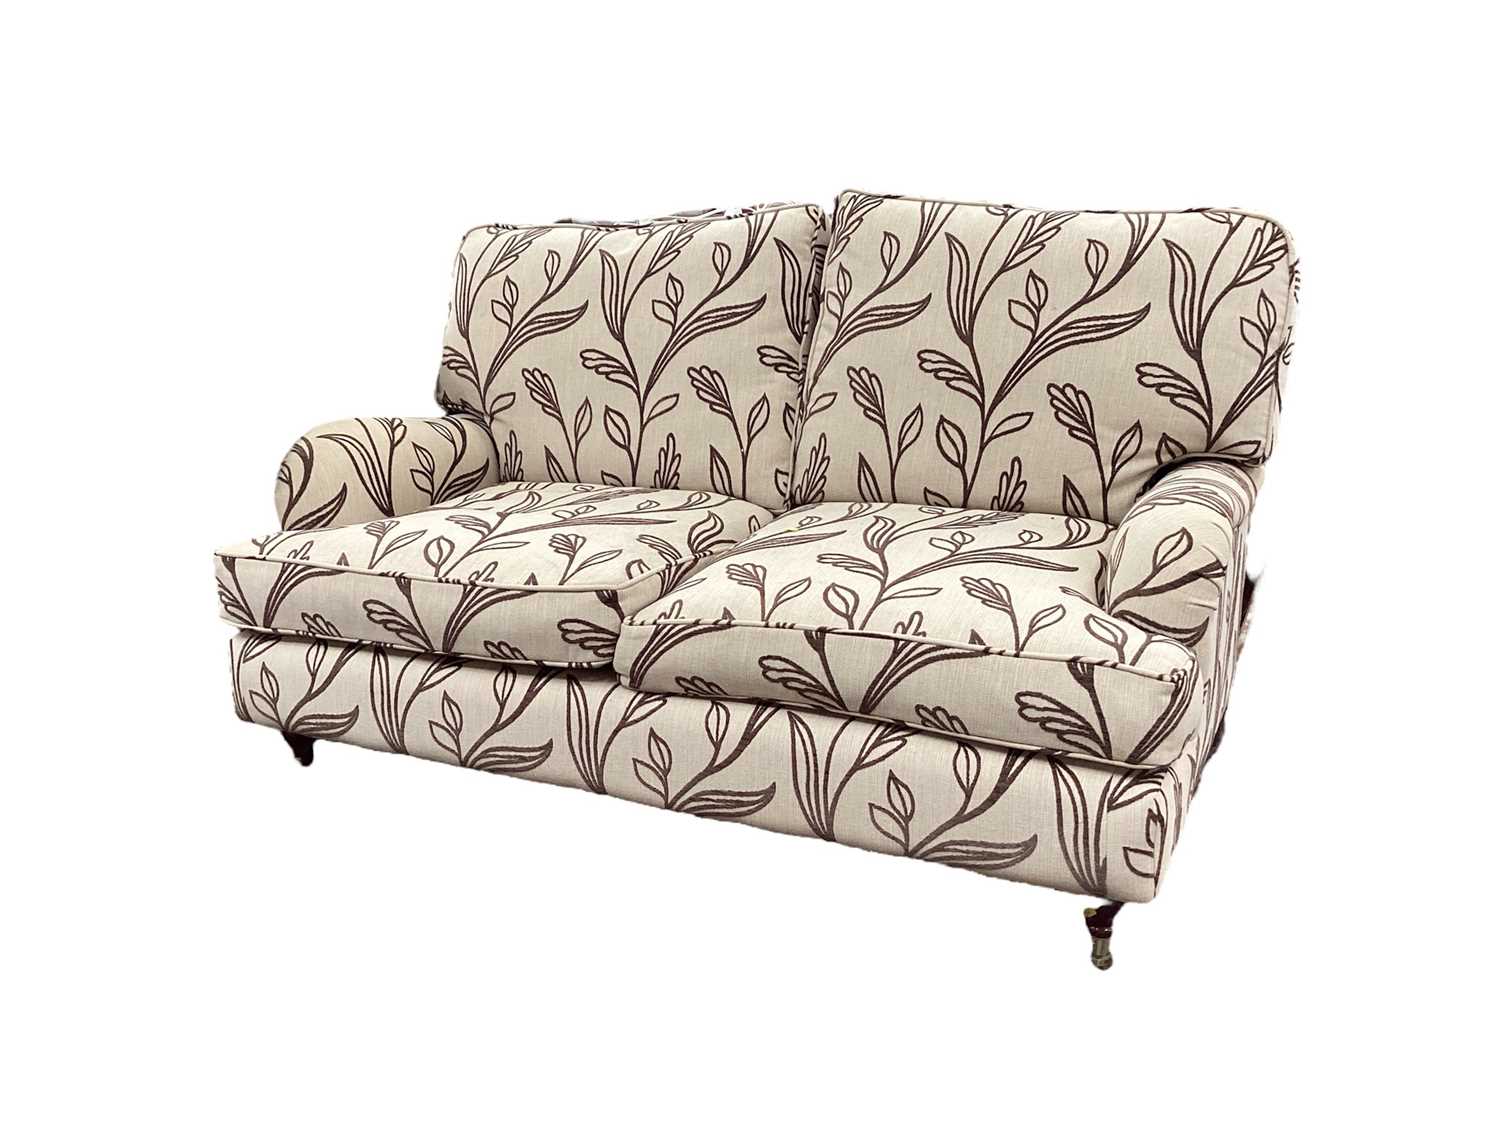 Contemporary cream two seater settee with brown leaf decoration on turned legs and brass castors, 14